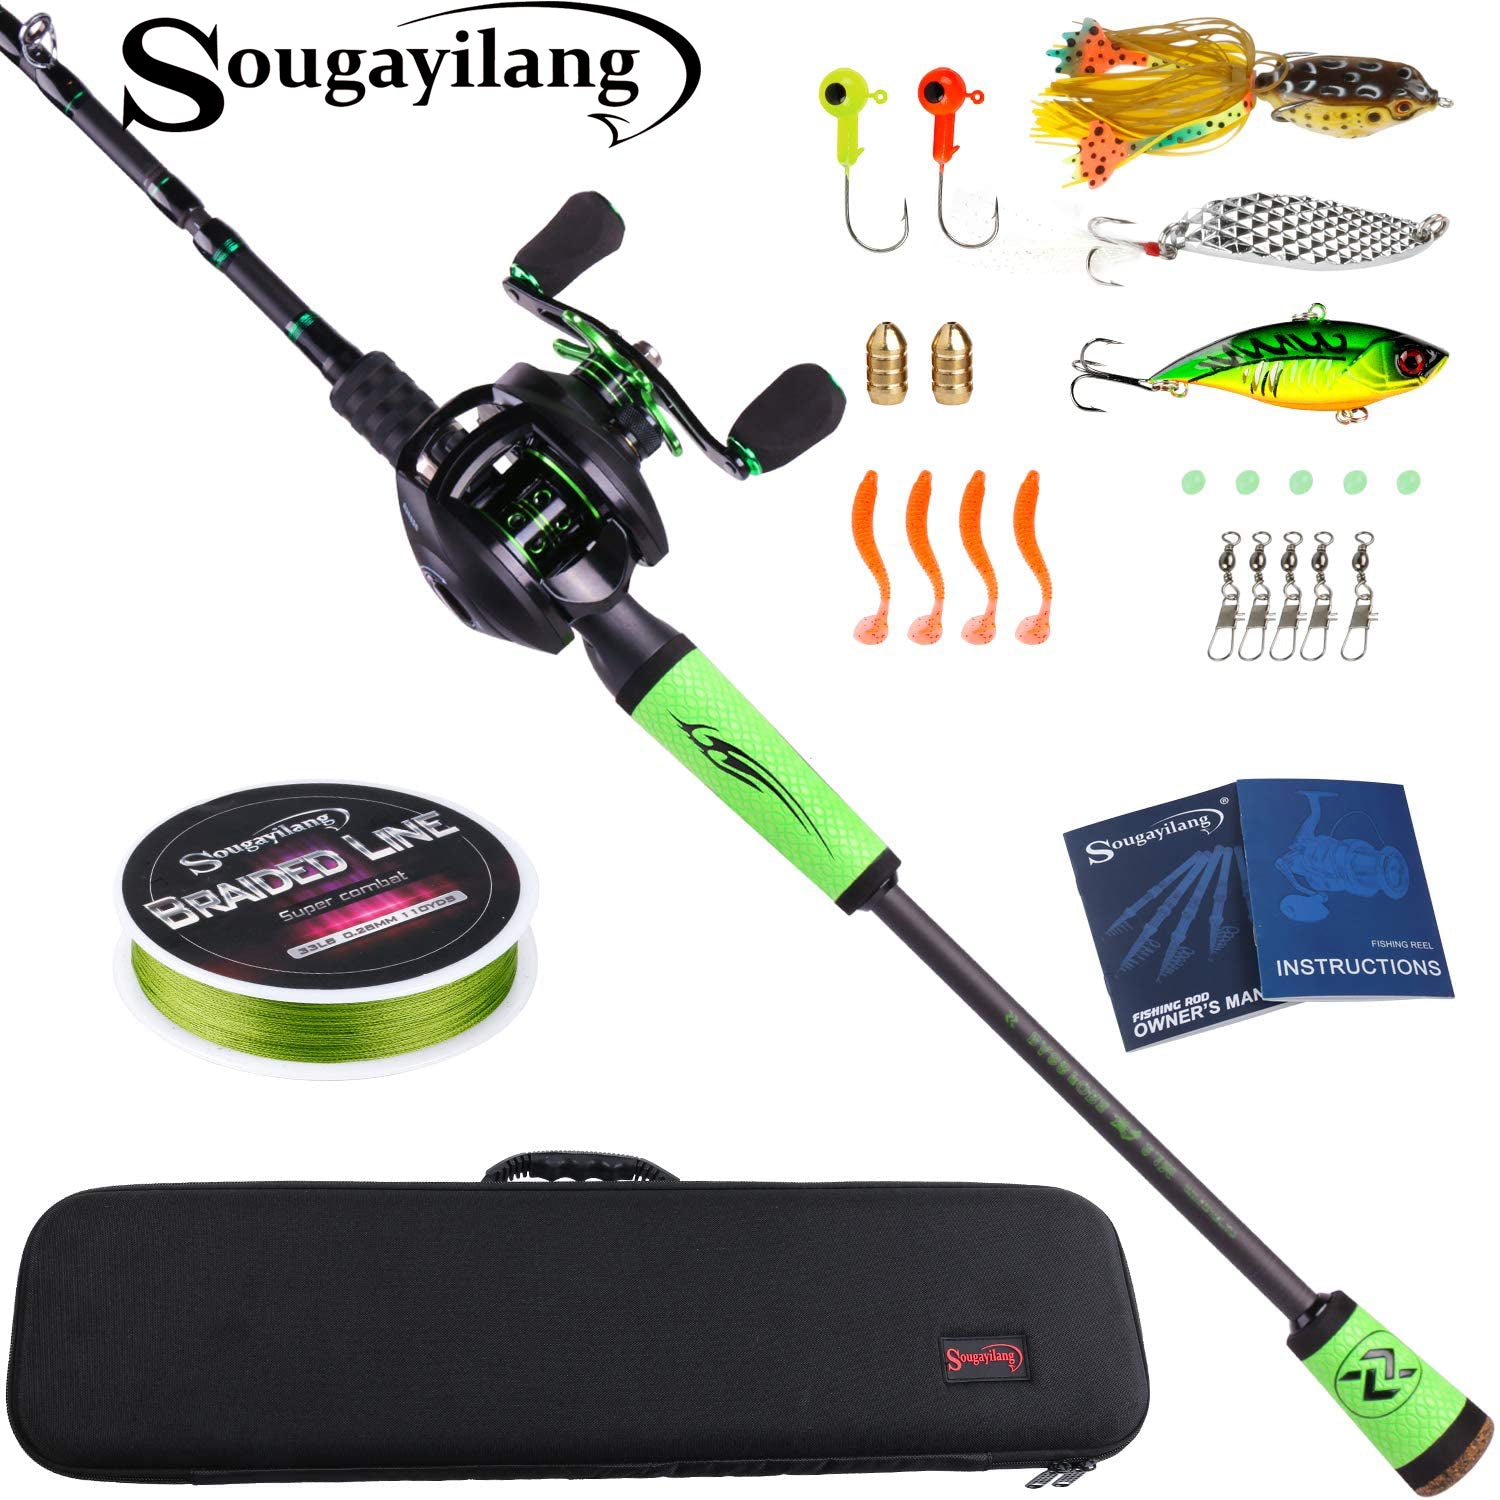 Sougayilang Speed Bass Fishing Rods, Porable Light Weight High Carbon 4 Pc  Blanks for Travel Freshwater Fishing-Spinning & Casting